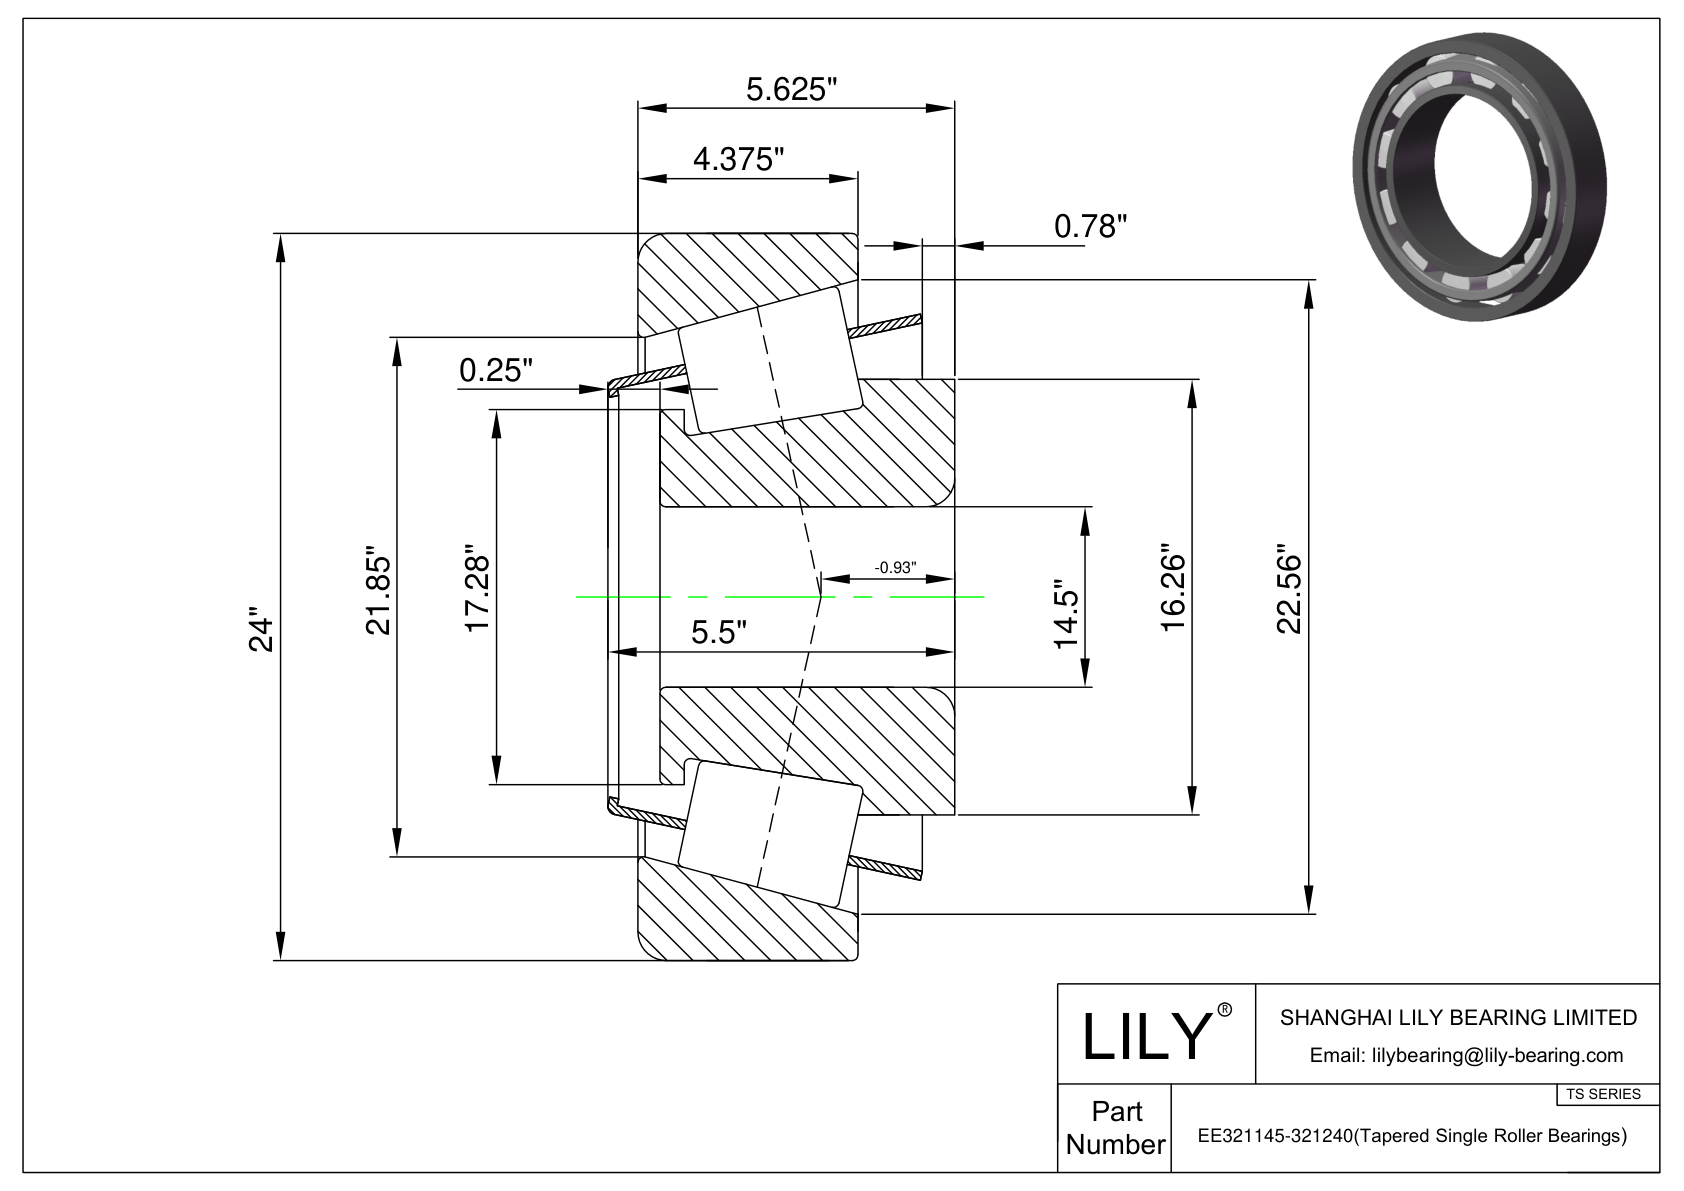 EE321145-321240 TS (Tapered Single Roller Bearings) (Imperial) cad drawing